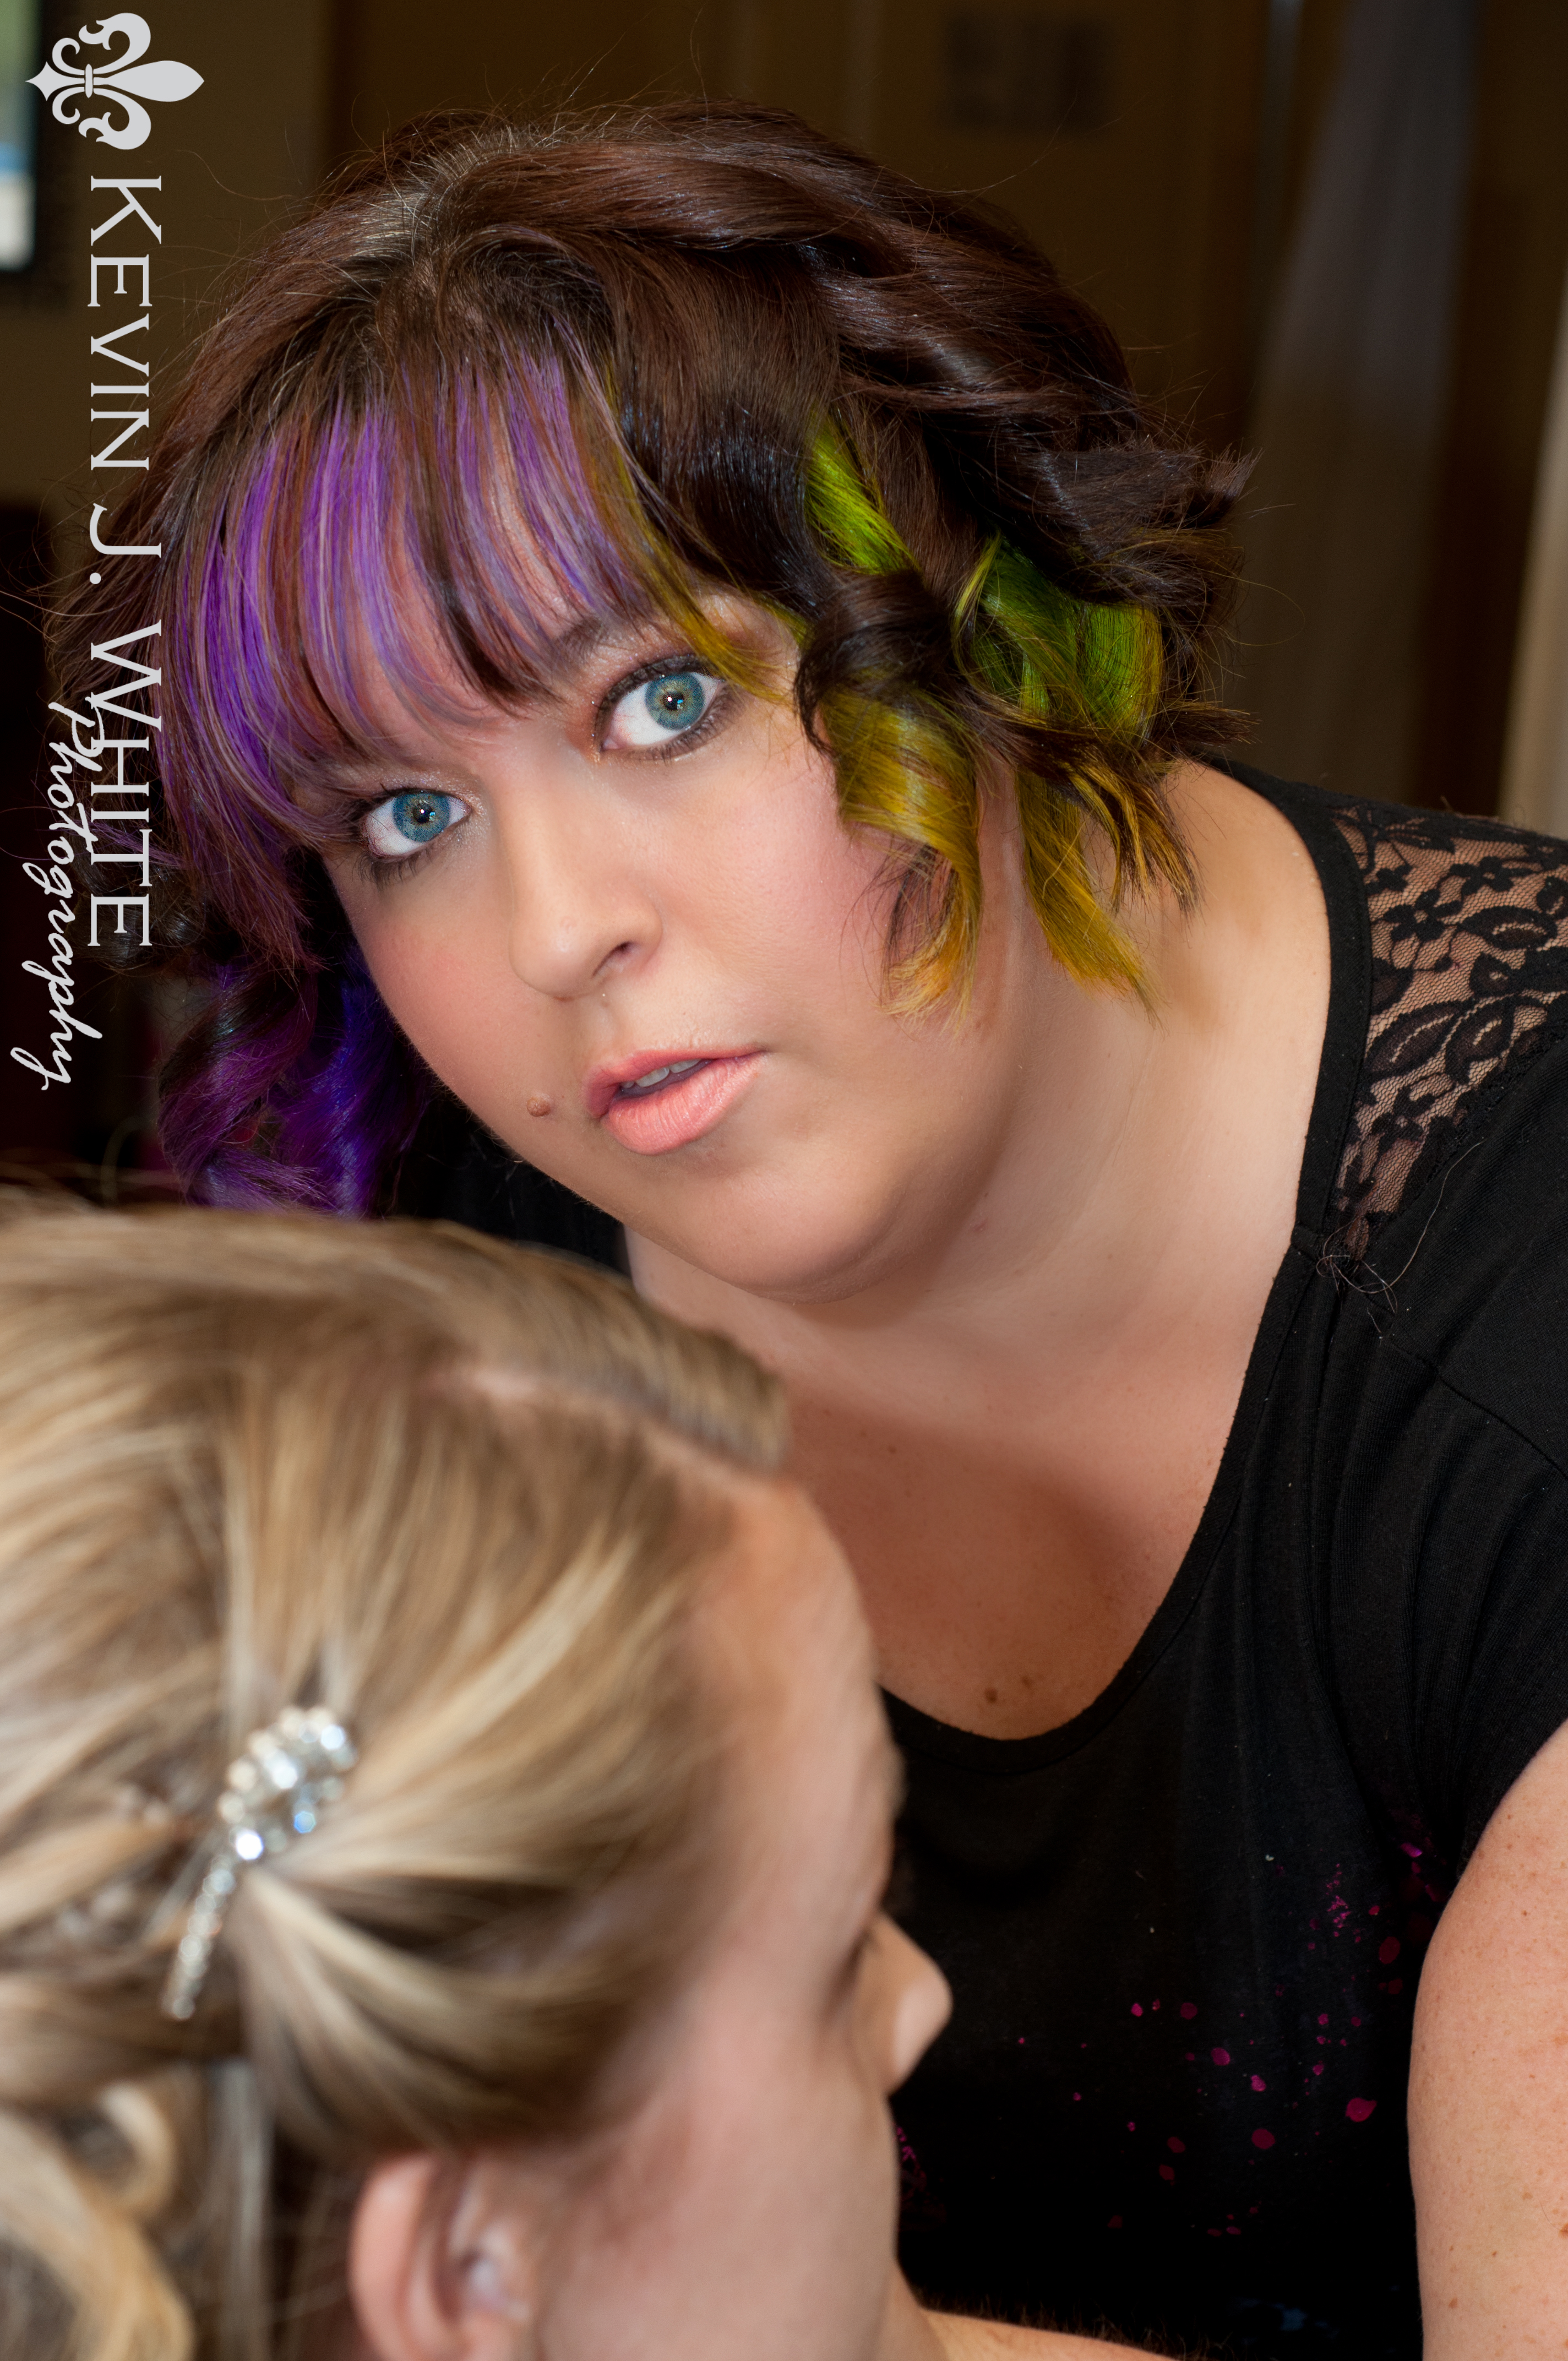 I am applying makeup at the Mosso - Gibson Wedding and the photographer caught me off guard.